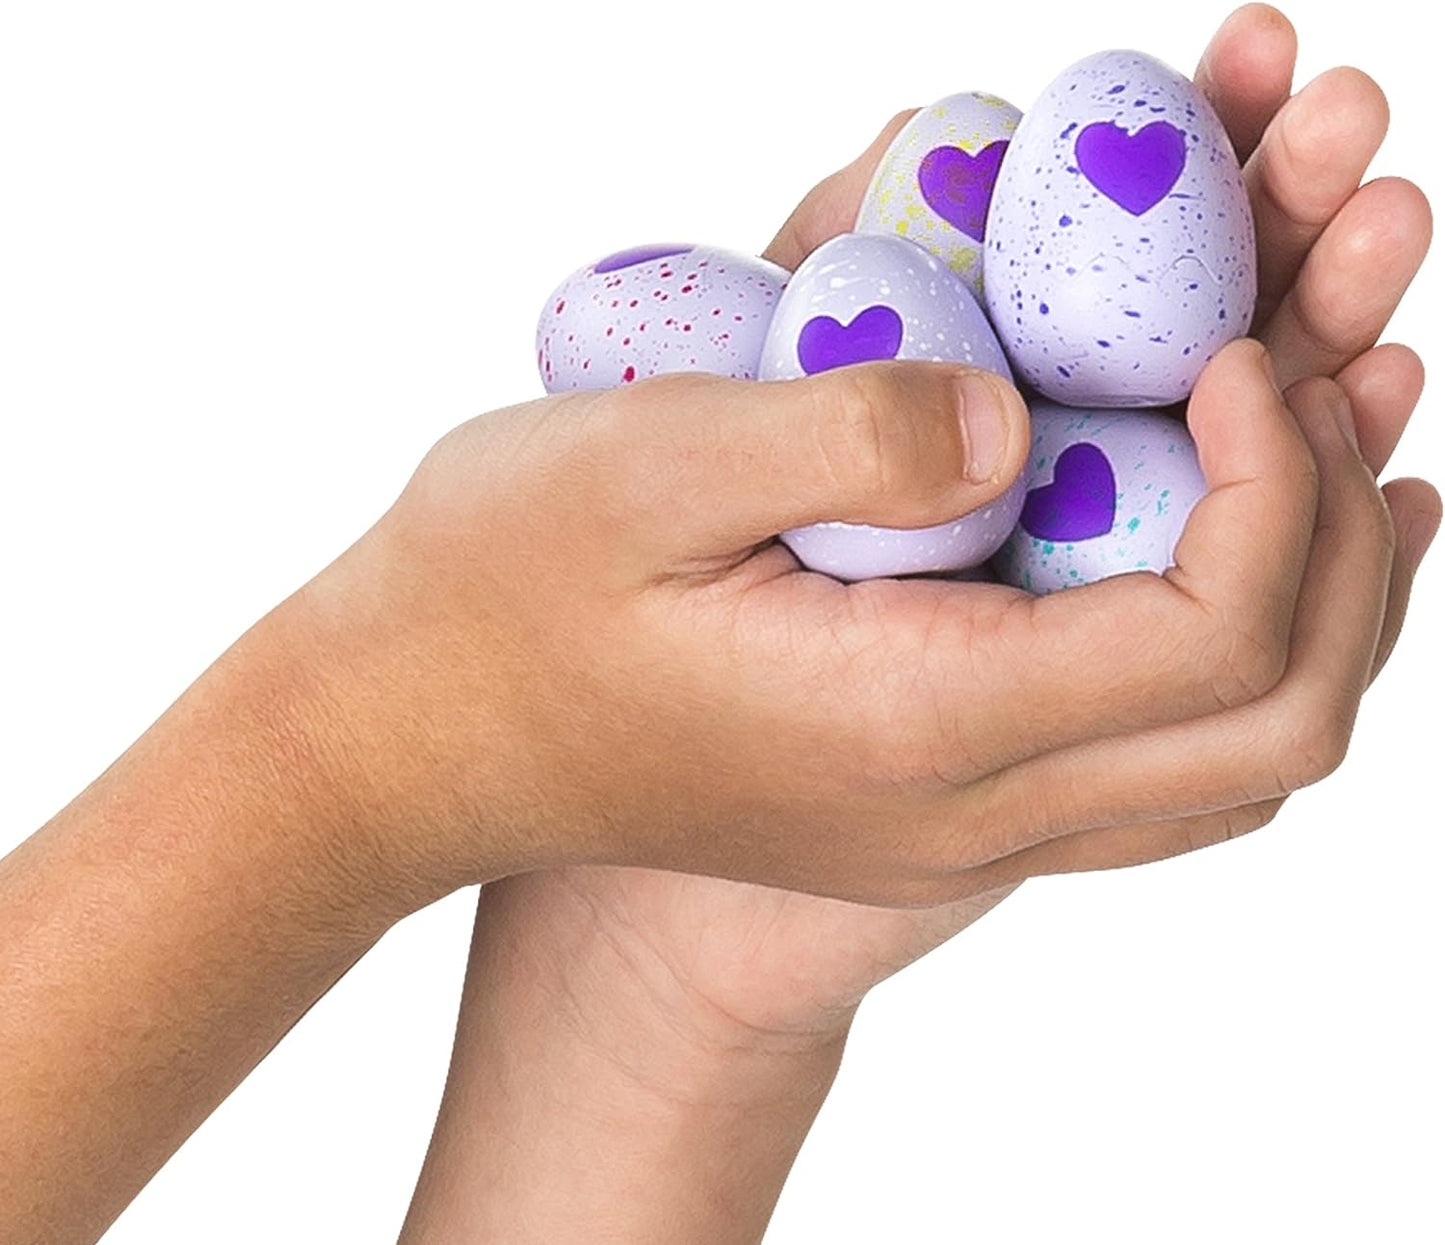 Hatchimals - CollEGGtibles 4-Pack (Styles Colors Vary)